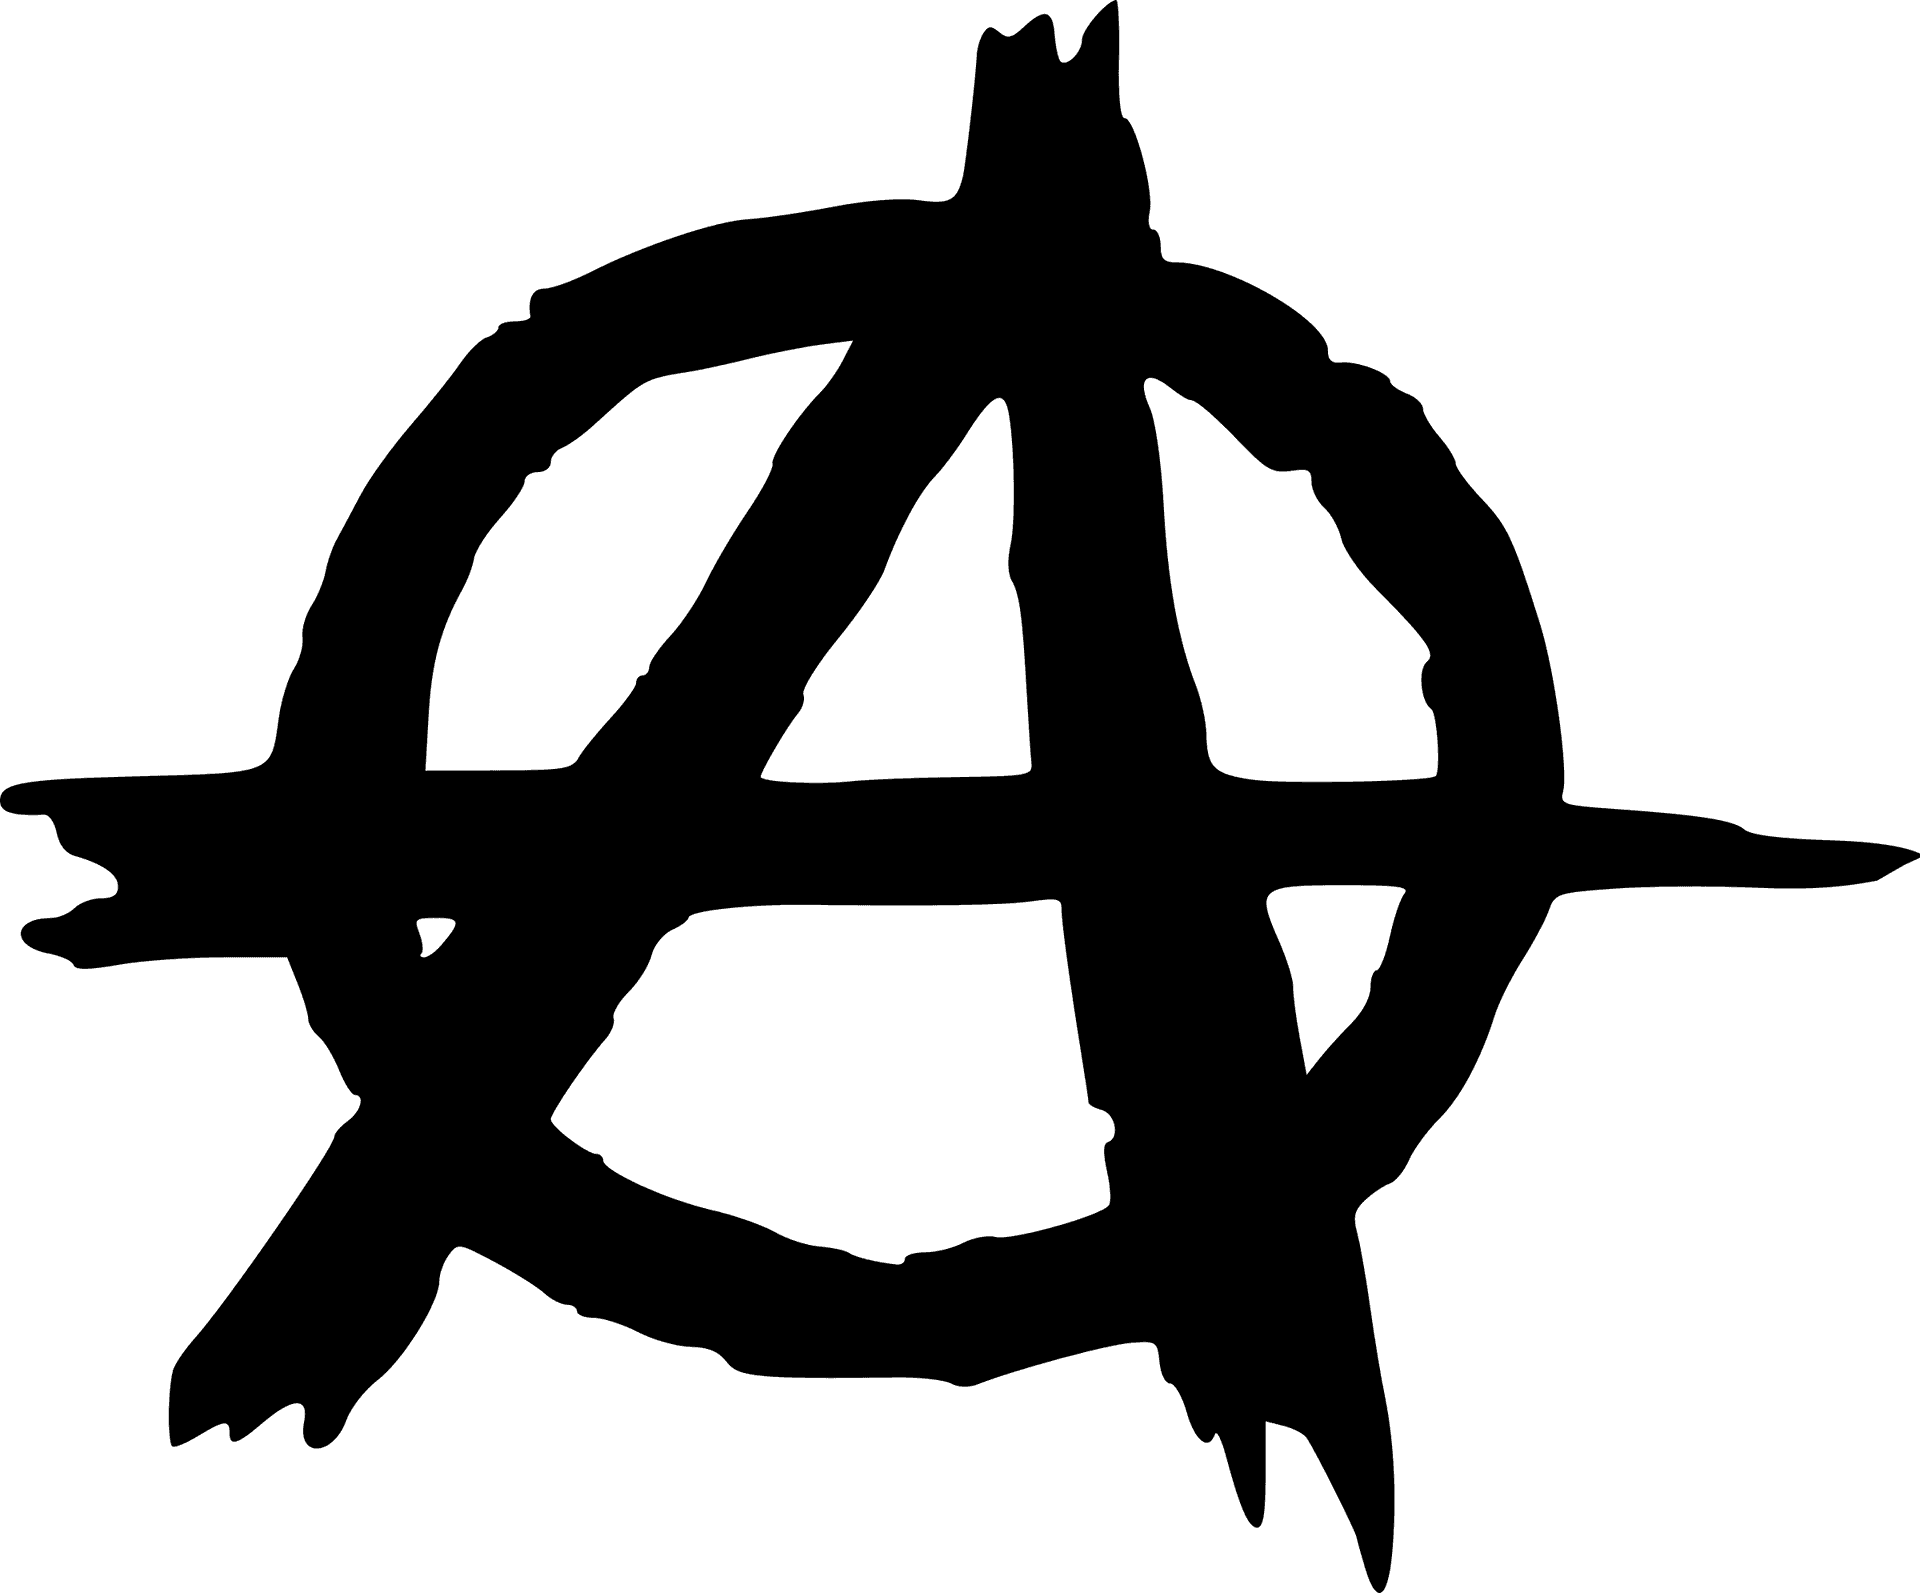 Anarchy Symbol Black Silhouette PNG